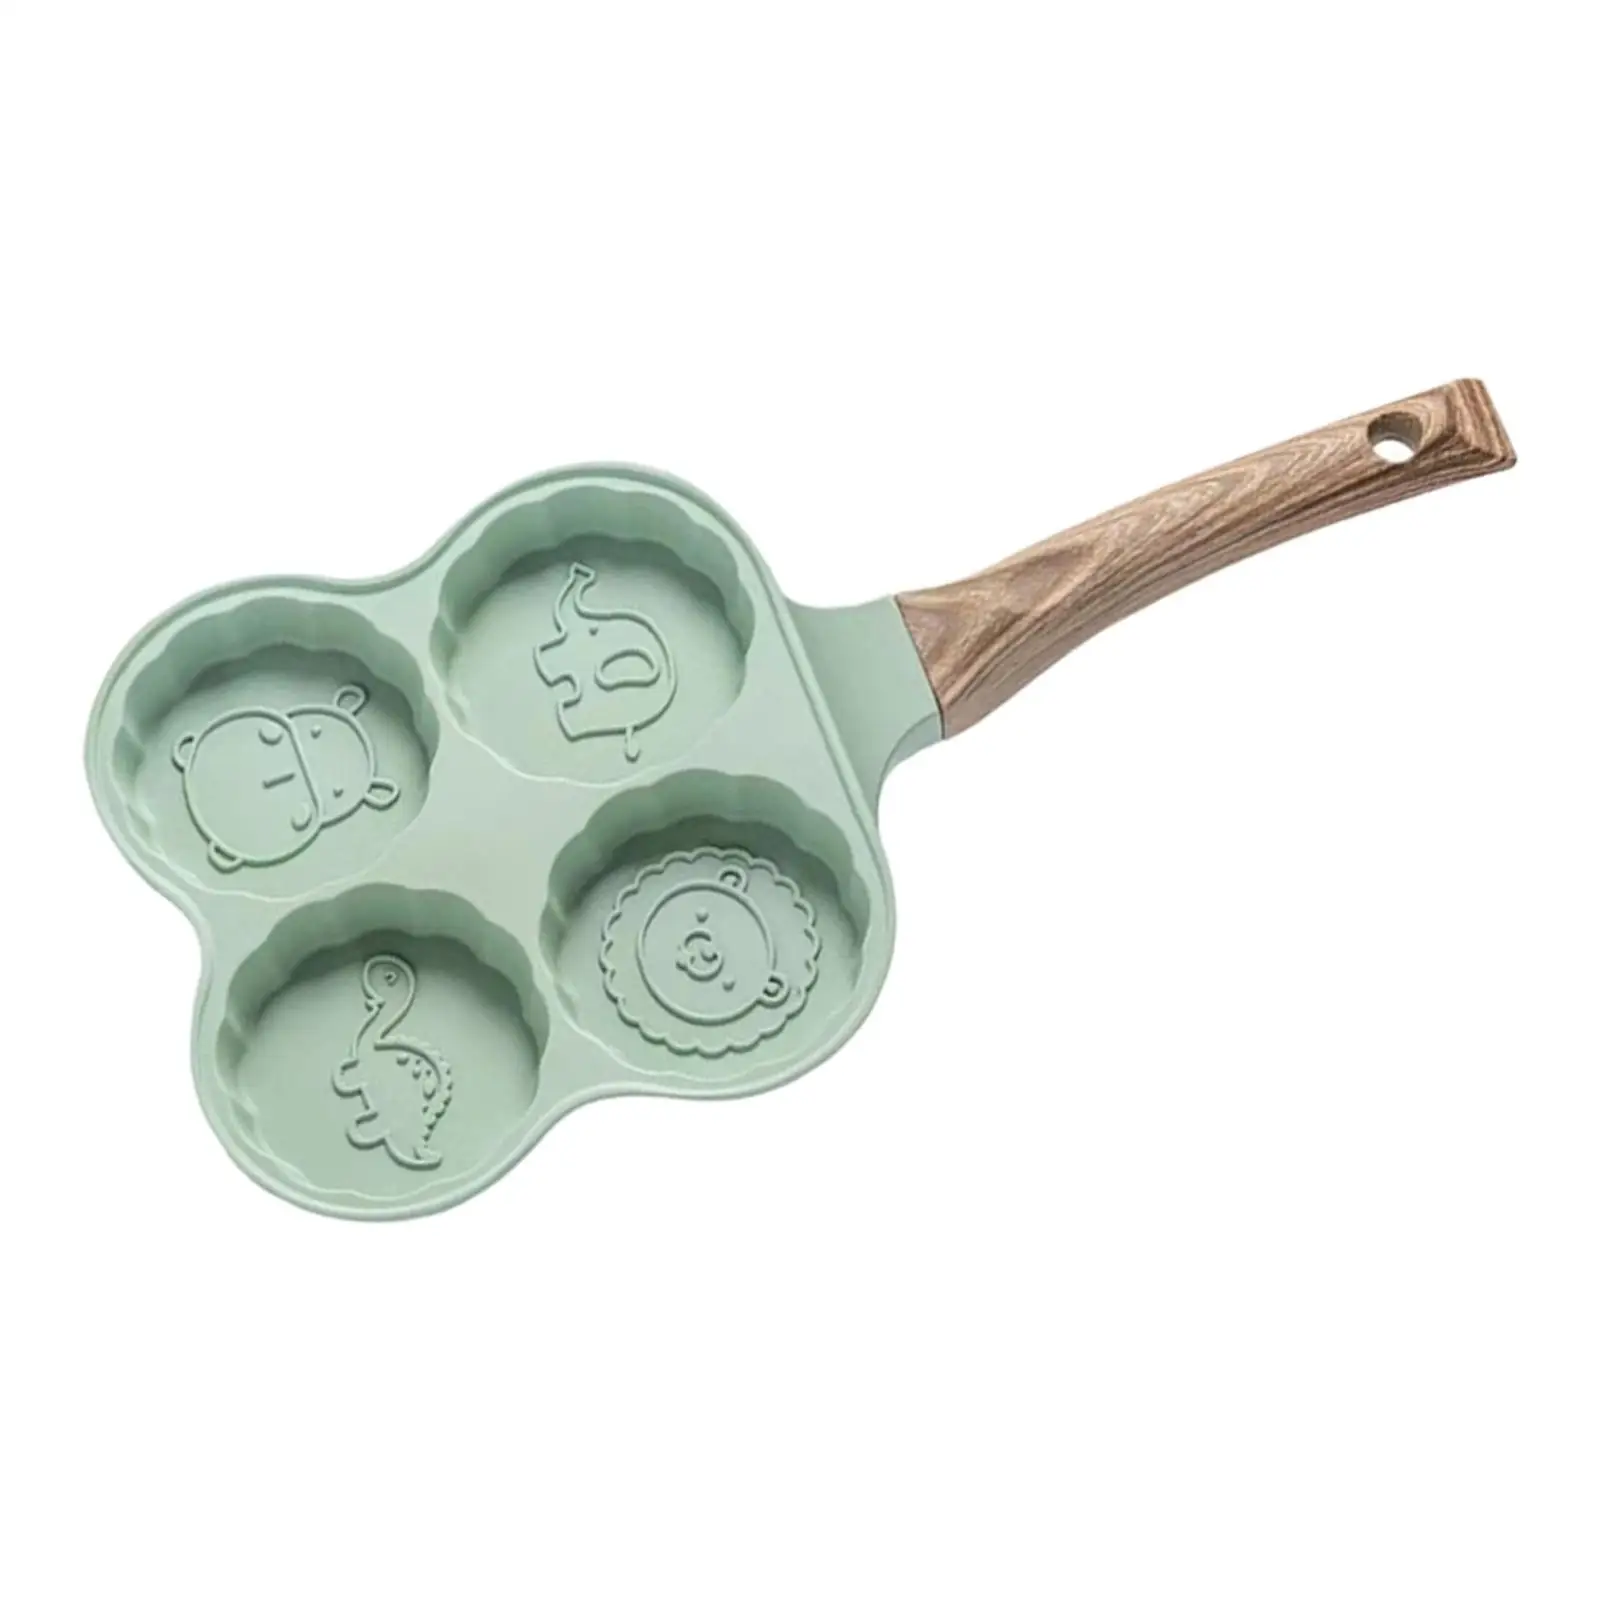 Mini Frying Egg Pans Wooden Handle Cookware Pancake Maker Egg Ham Pans Small Frying Pan for Cooking Induction Cooker Household